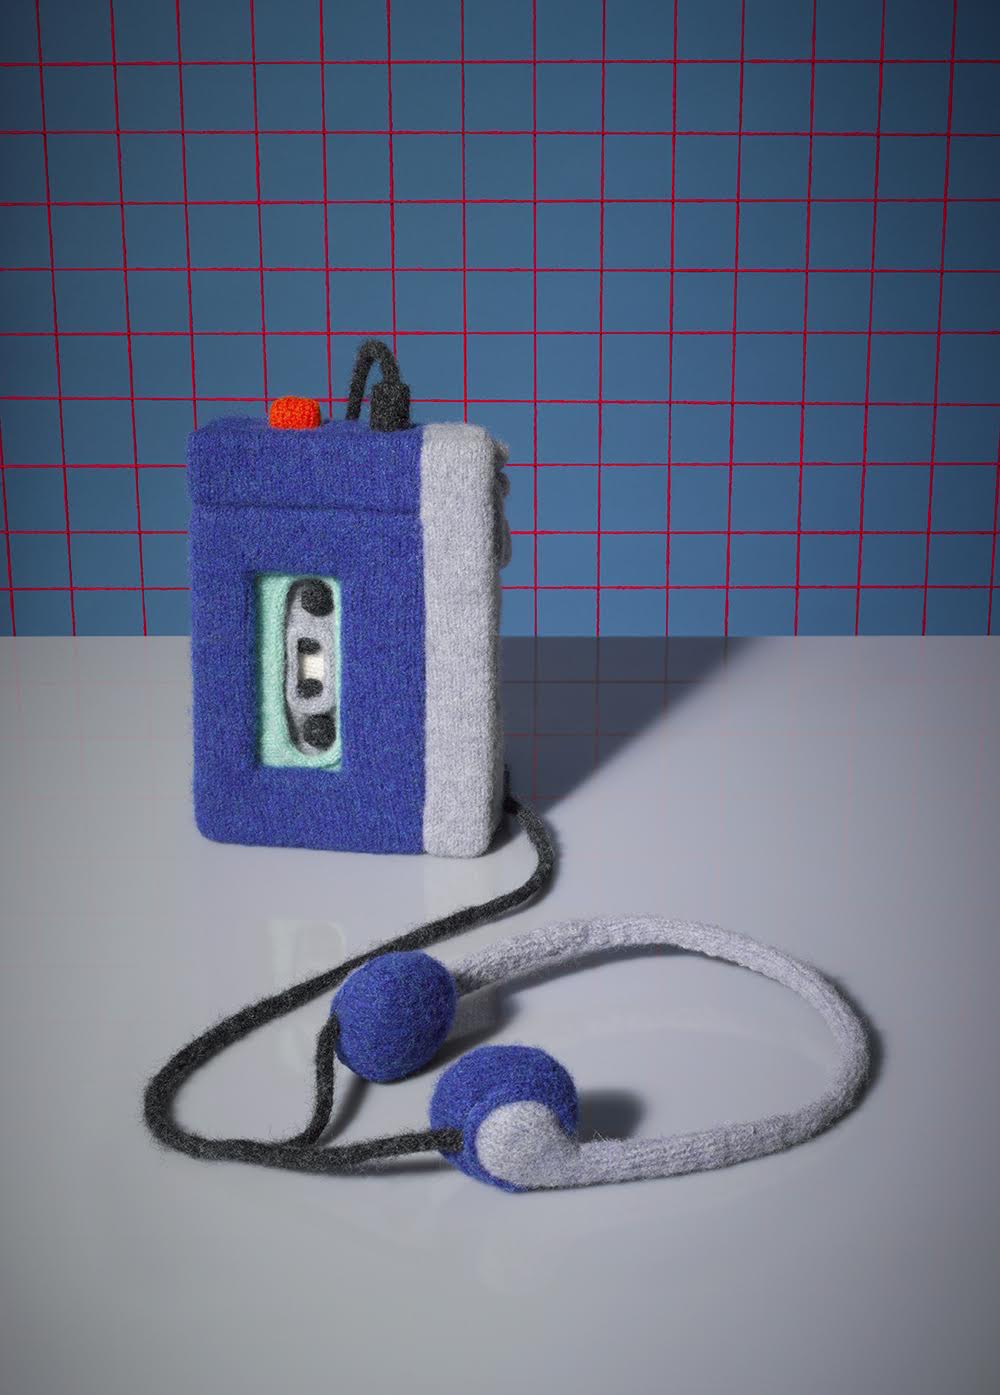 Sony Walkman TPS L2 1979, 100% lambswool, photographed by David Sykes 